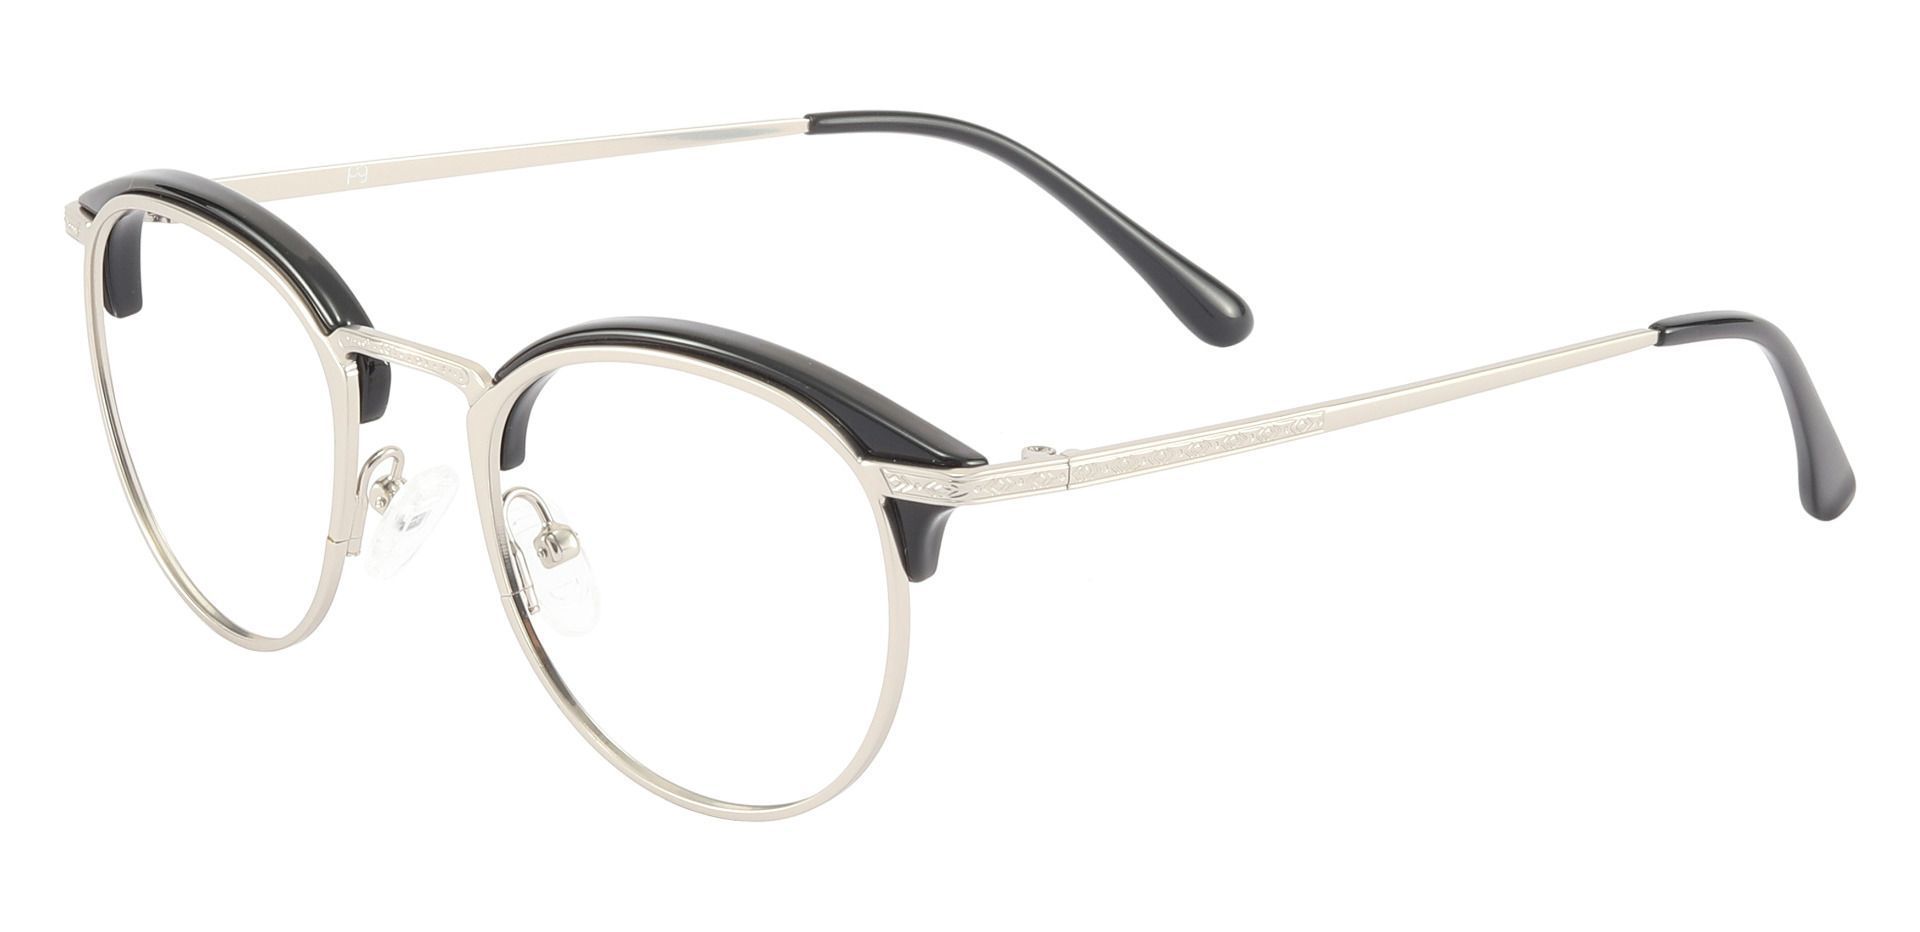 Shultz Browline Lined Bifocal Glasses - Silver